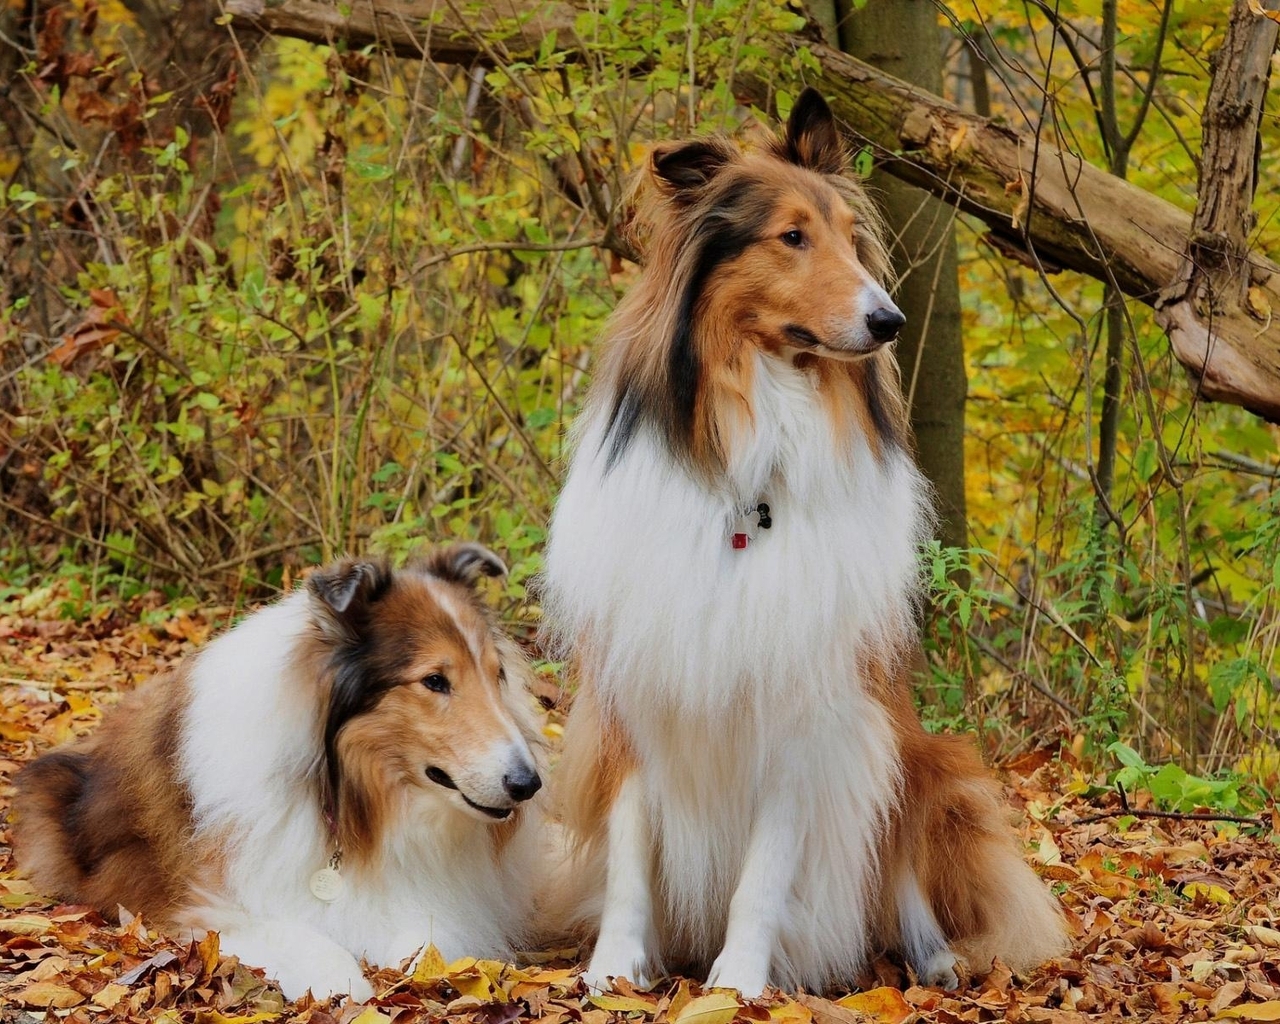 Image: Dog, long-haired, Collie, couple, forest, foliage